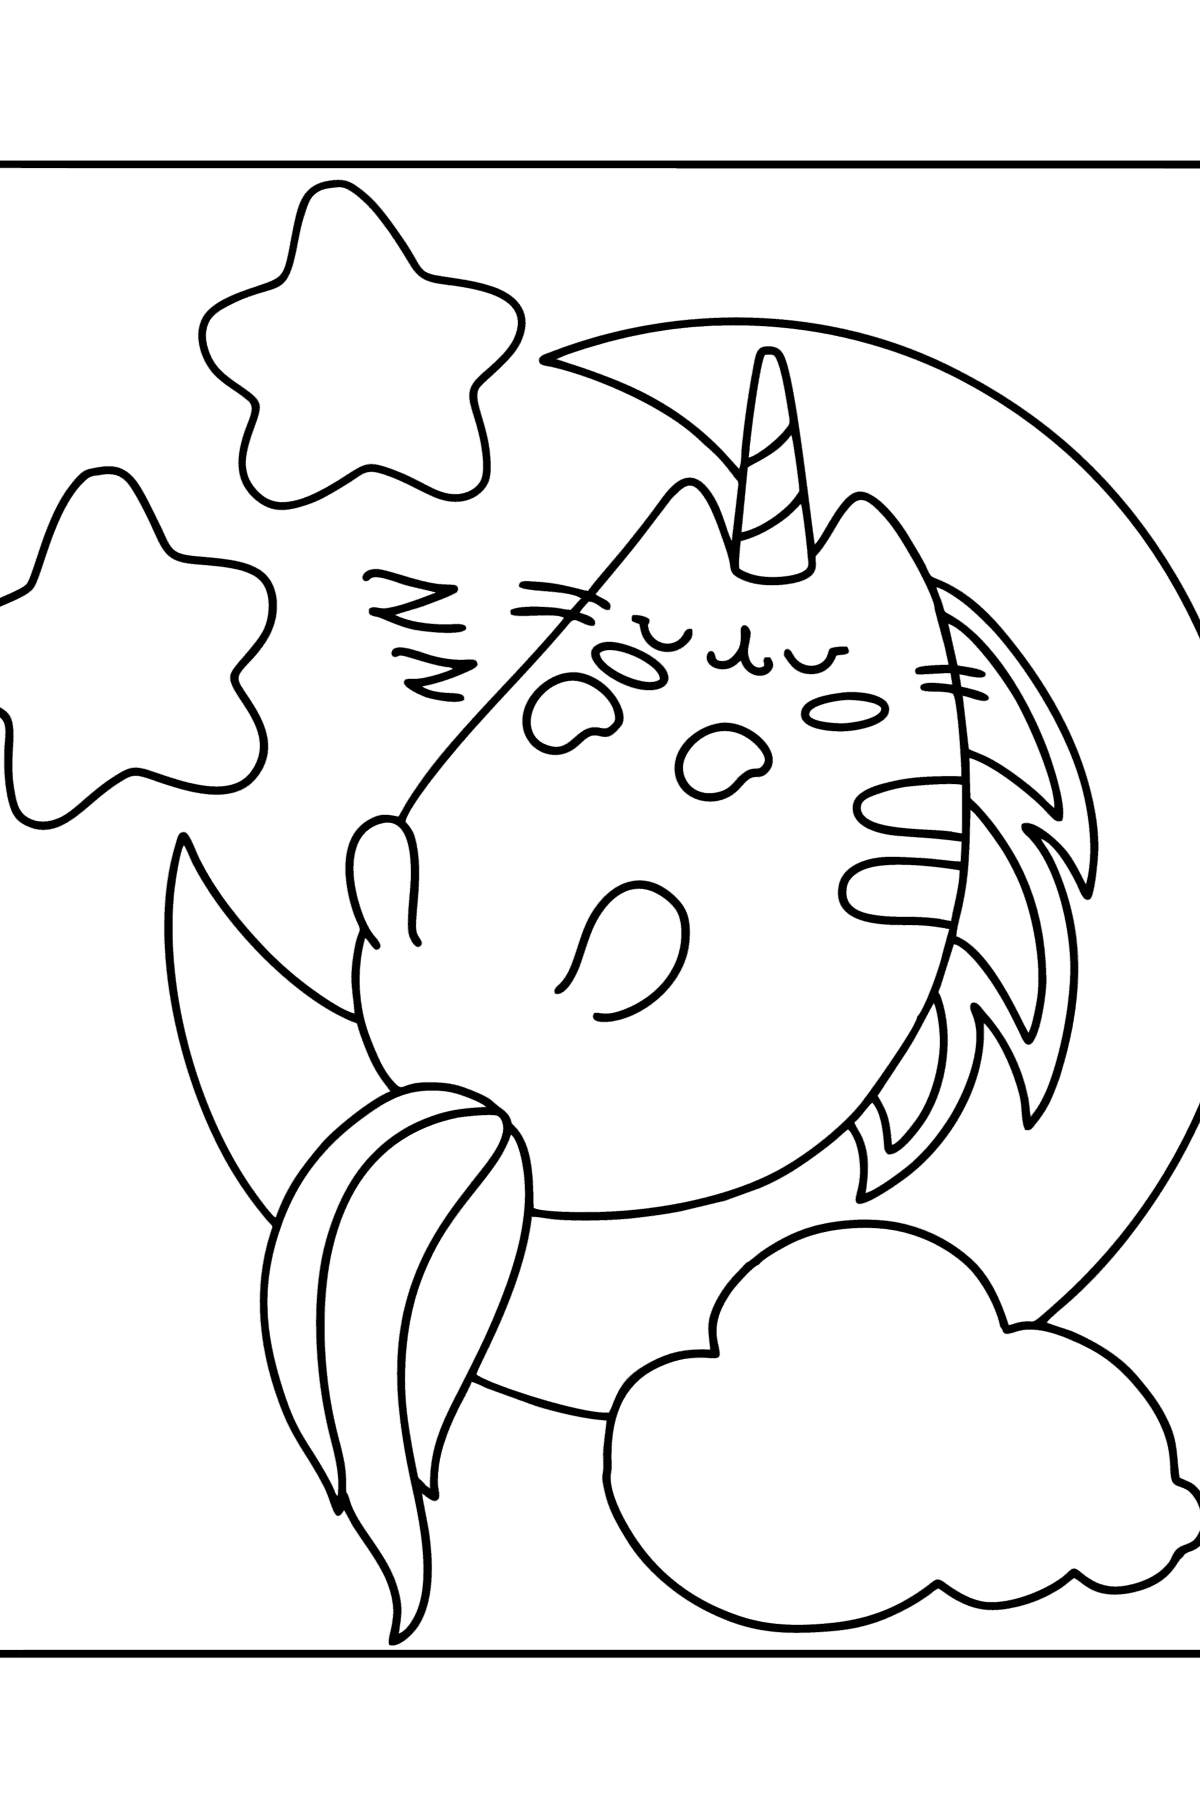 Pusheen unicorn сoloring page - Coloring Pages for Kids